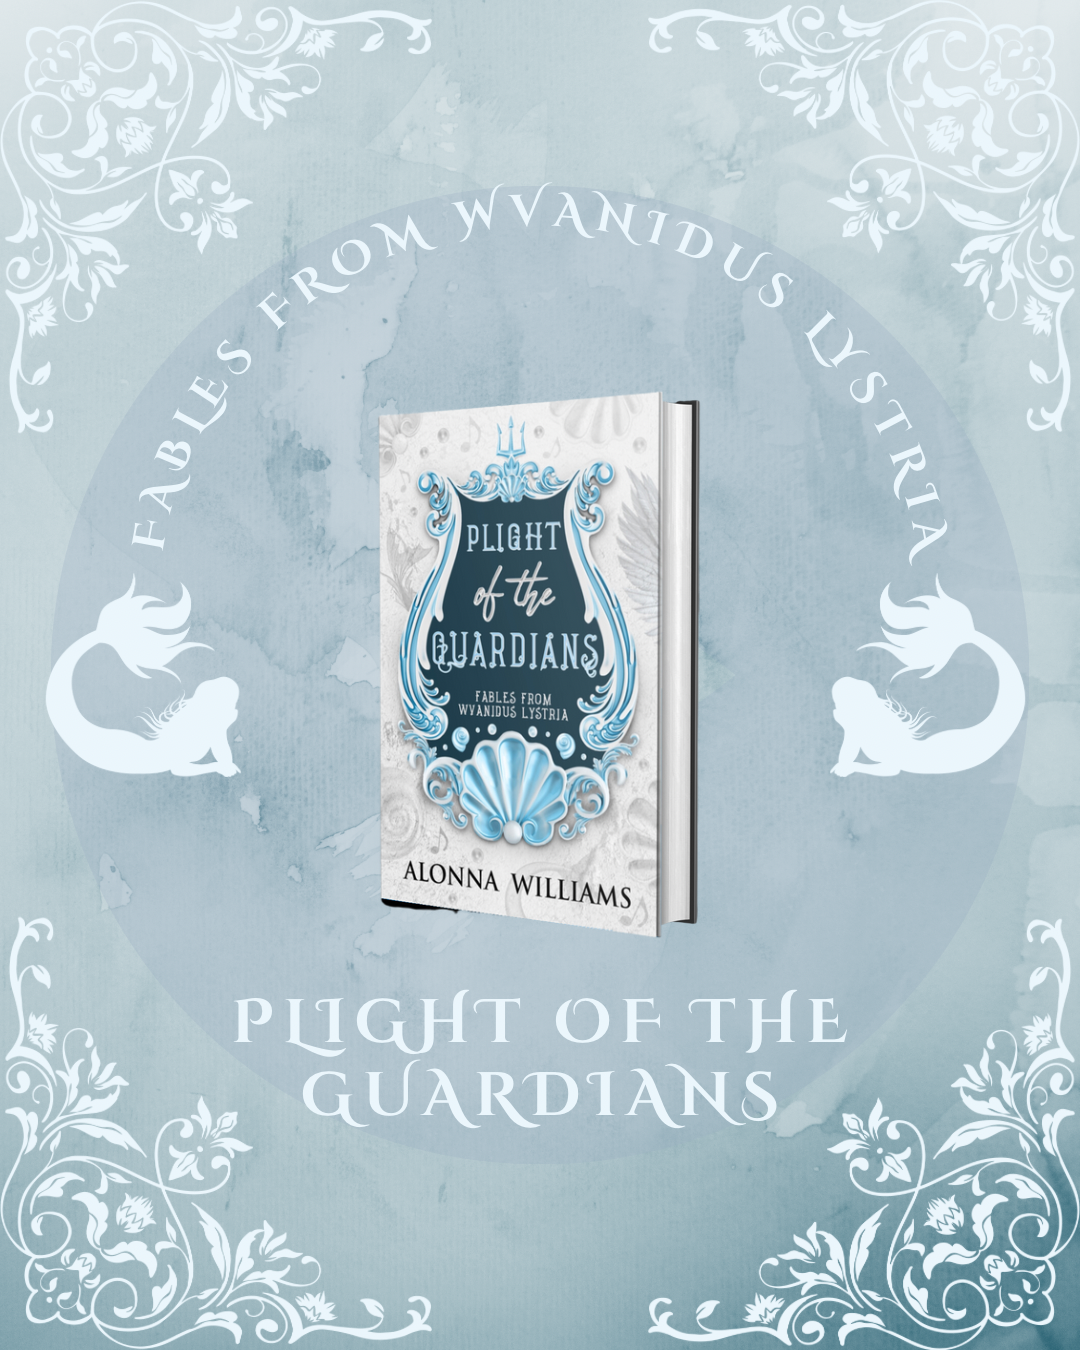 Fables from Wvanidus Lystria: Plight of the Guardians